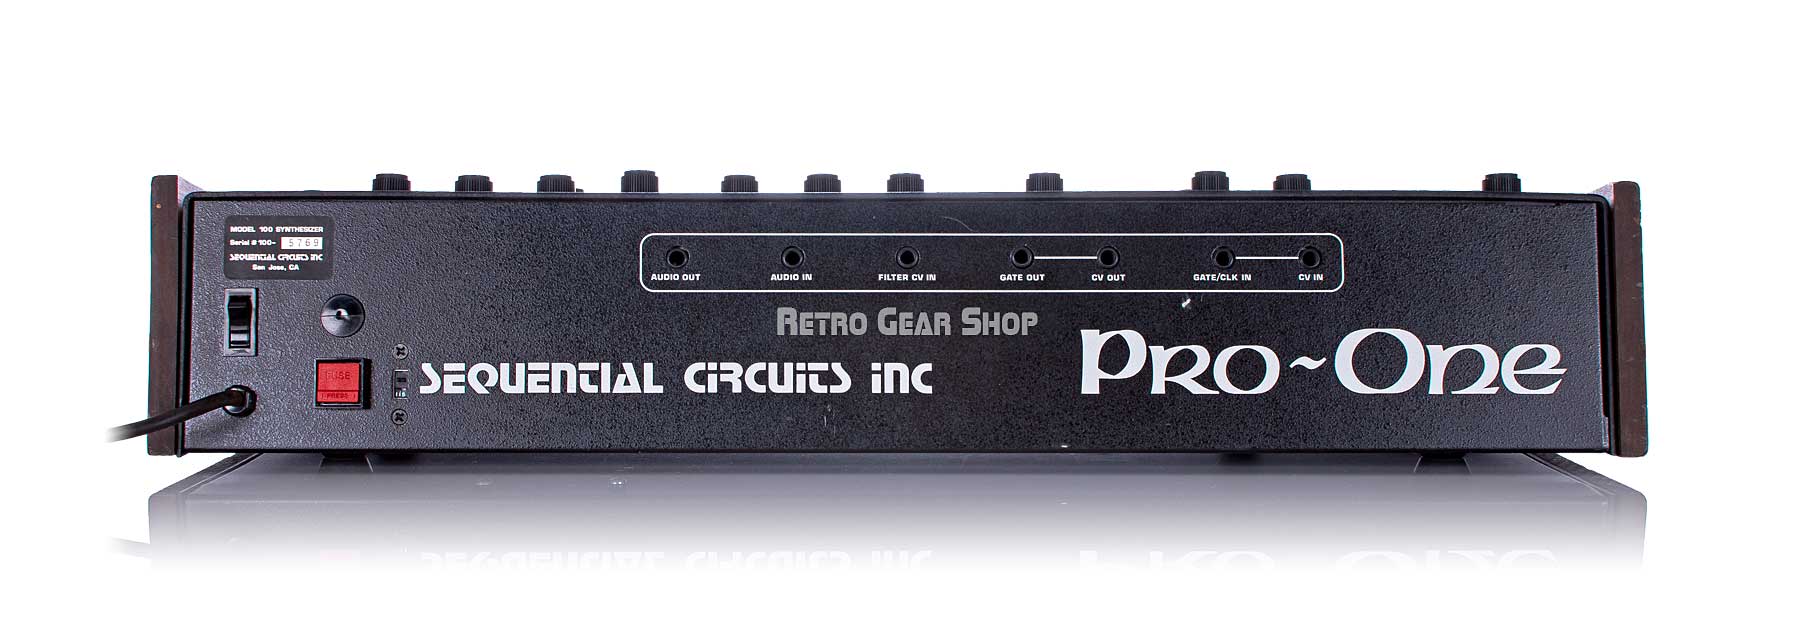 Sequential Circuits Pro One J-Wire Serviced Rear